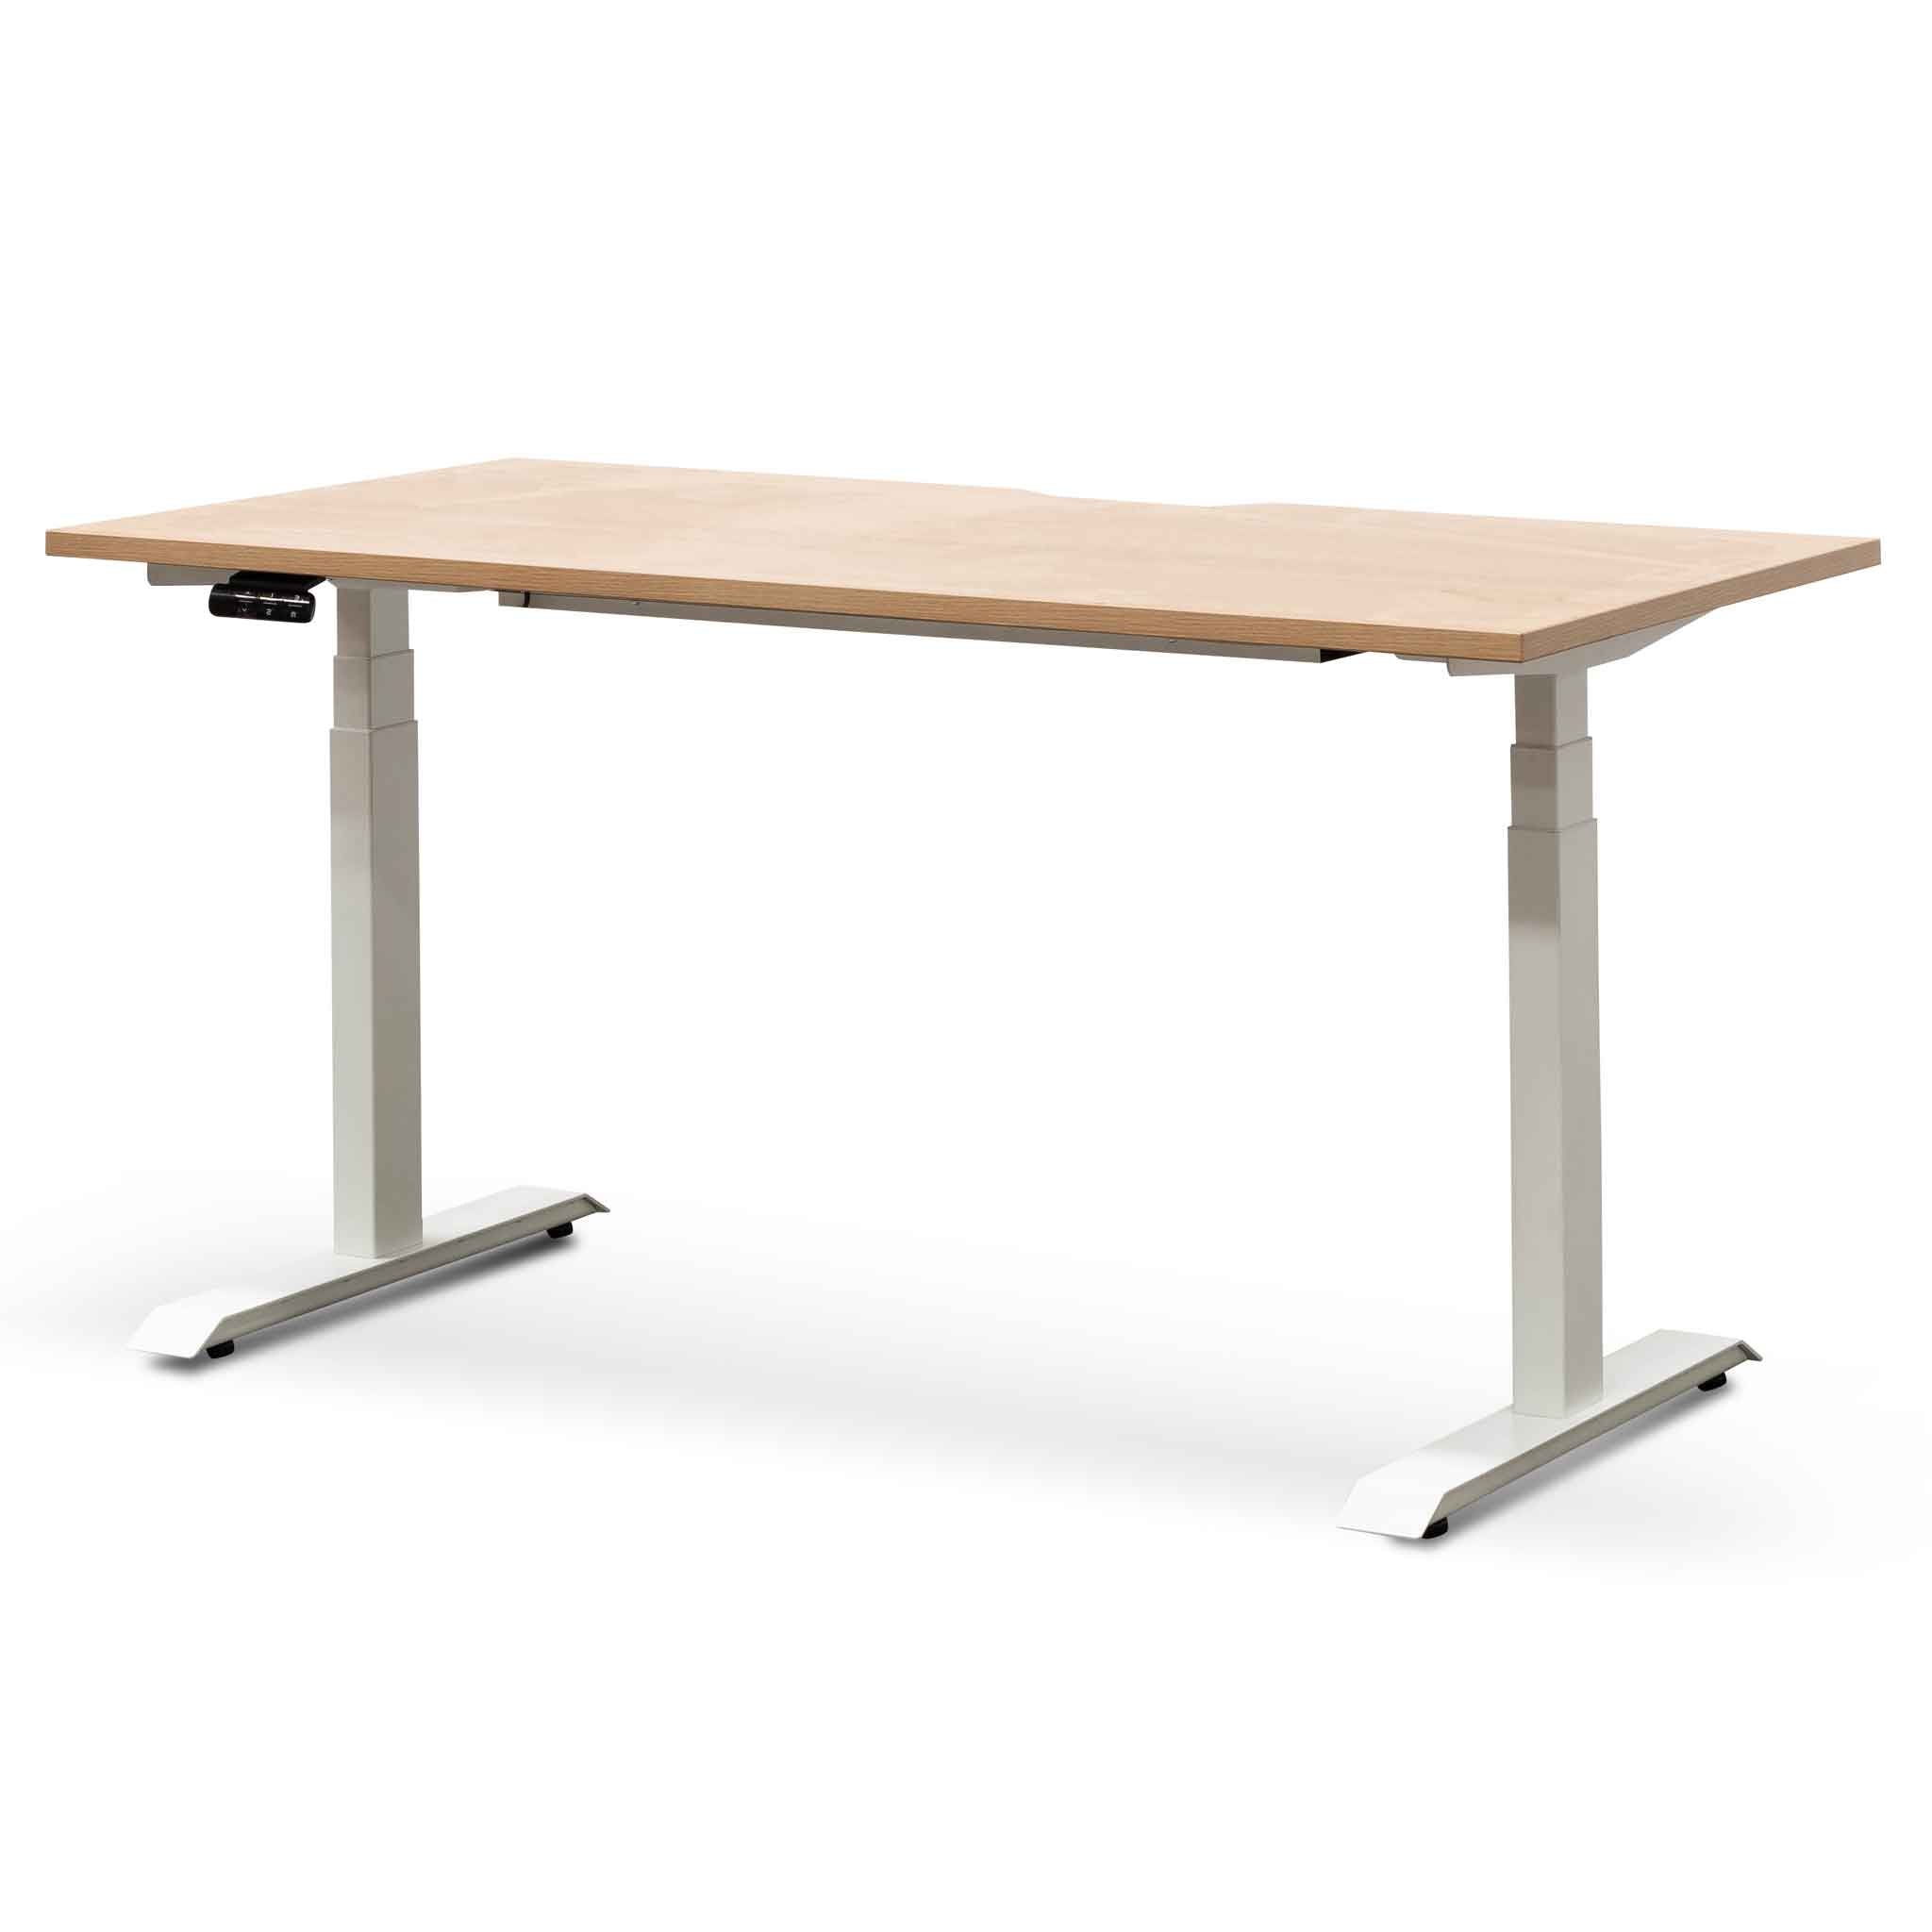 Brielle Standing Office Desk - Natural with White Legs